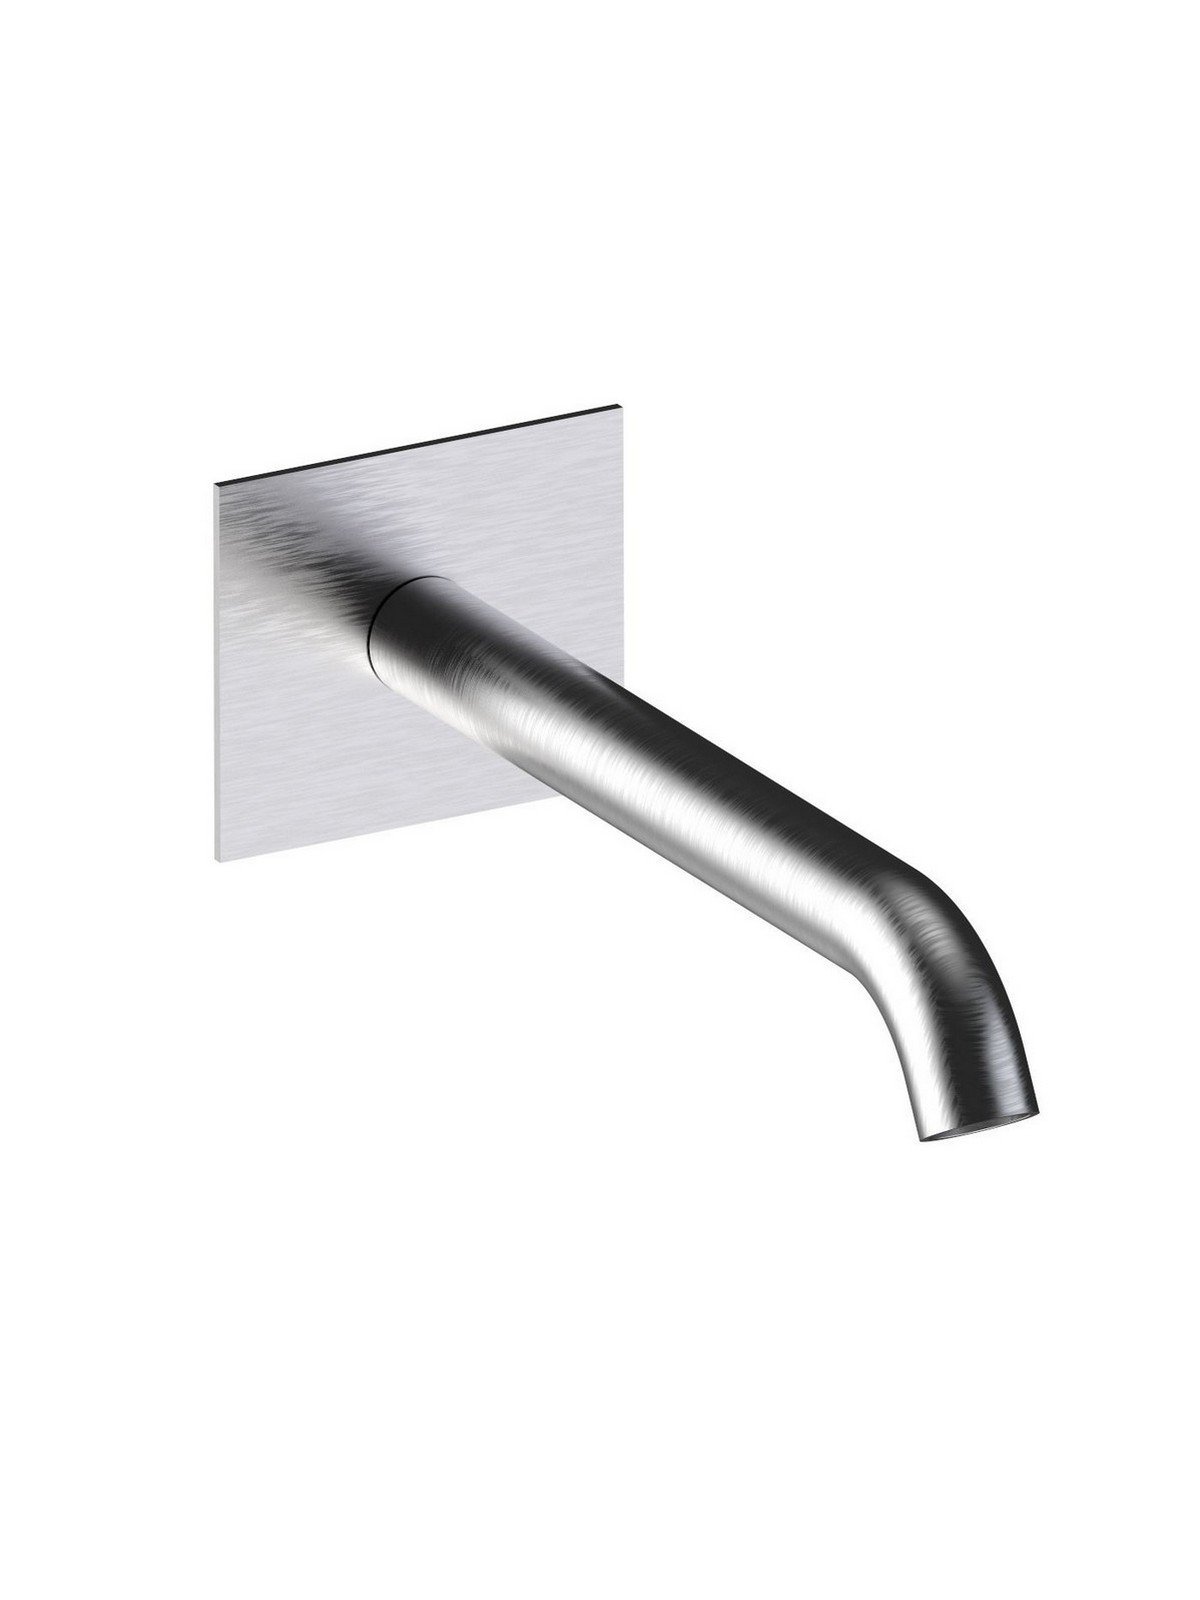 Wall-mounted spout for bath and washbasin mixer